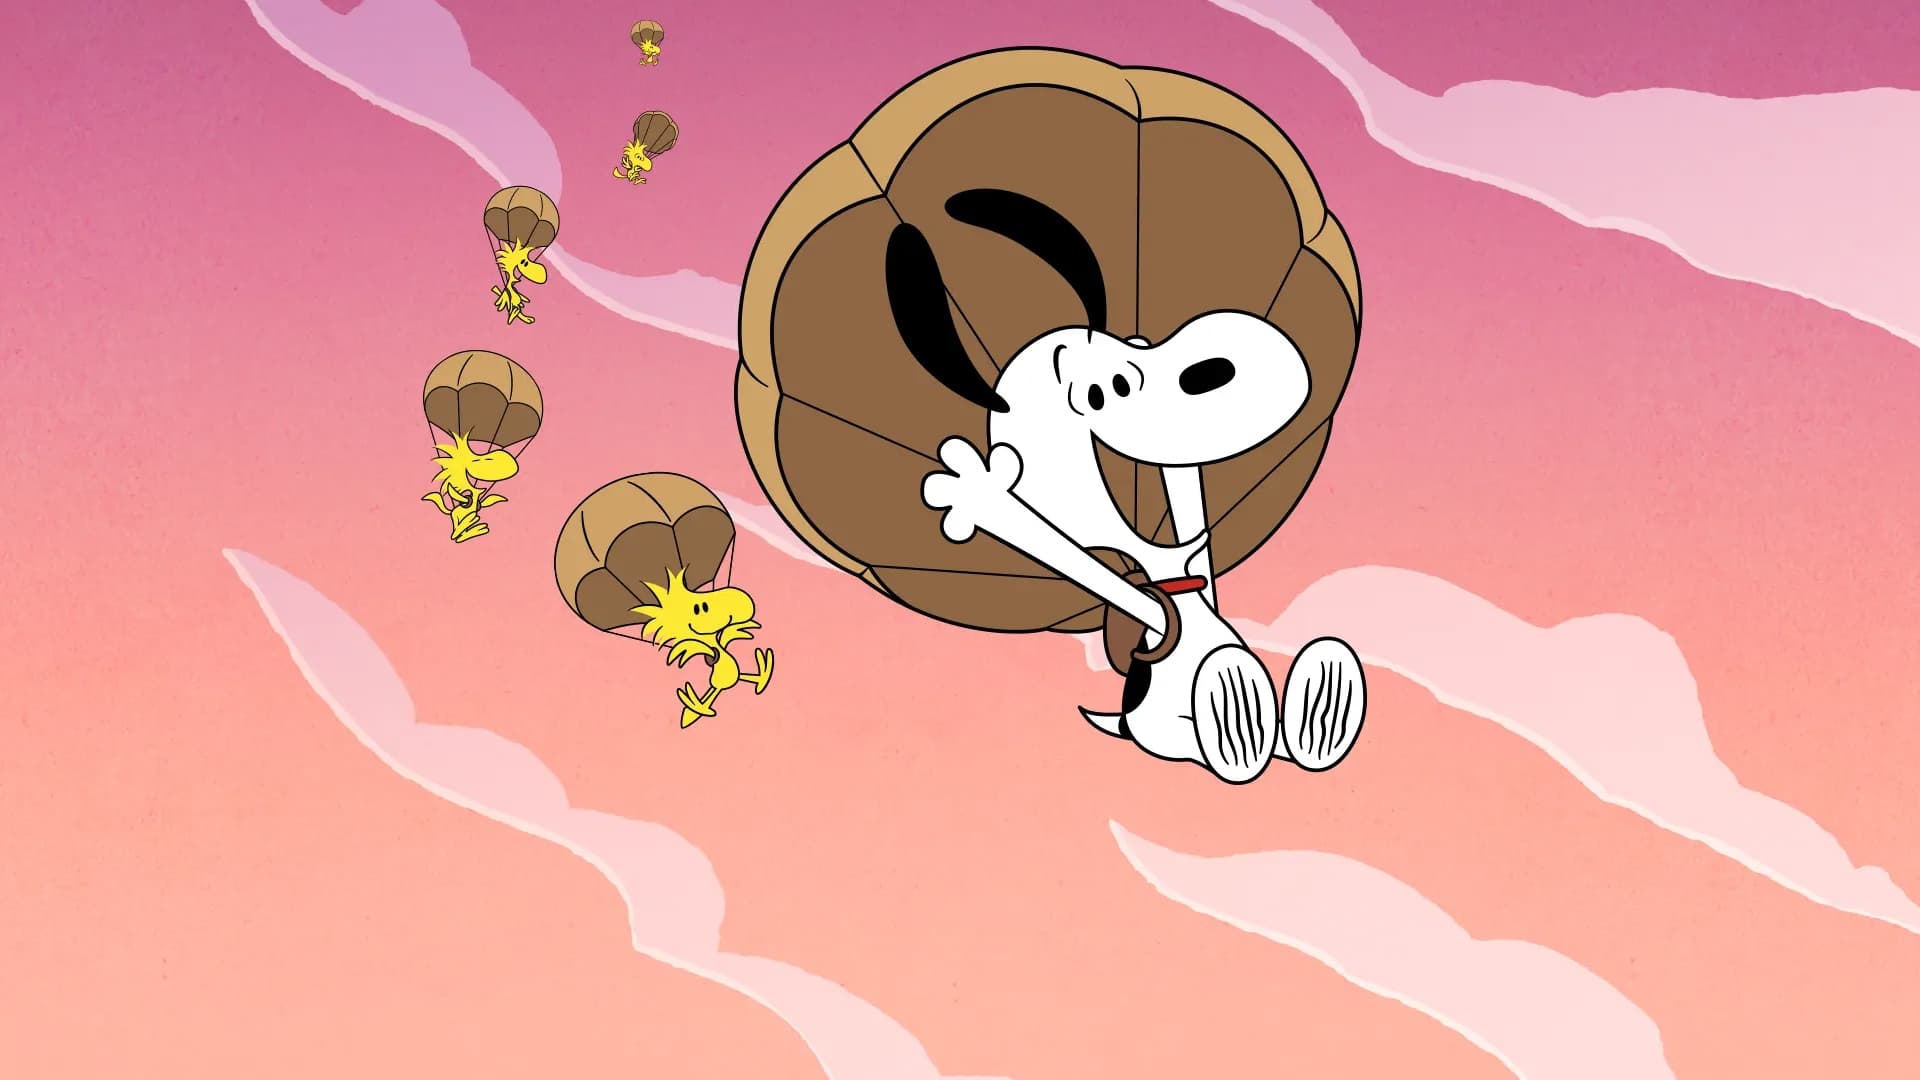 The Snoopy Show Gallery Image